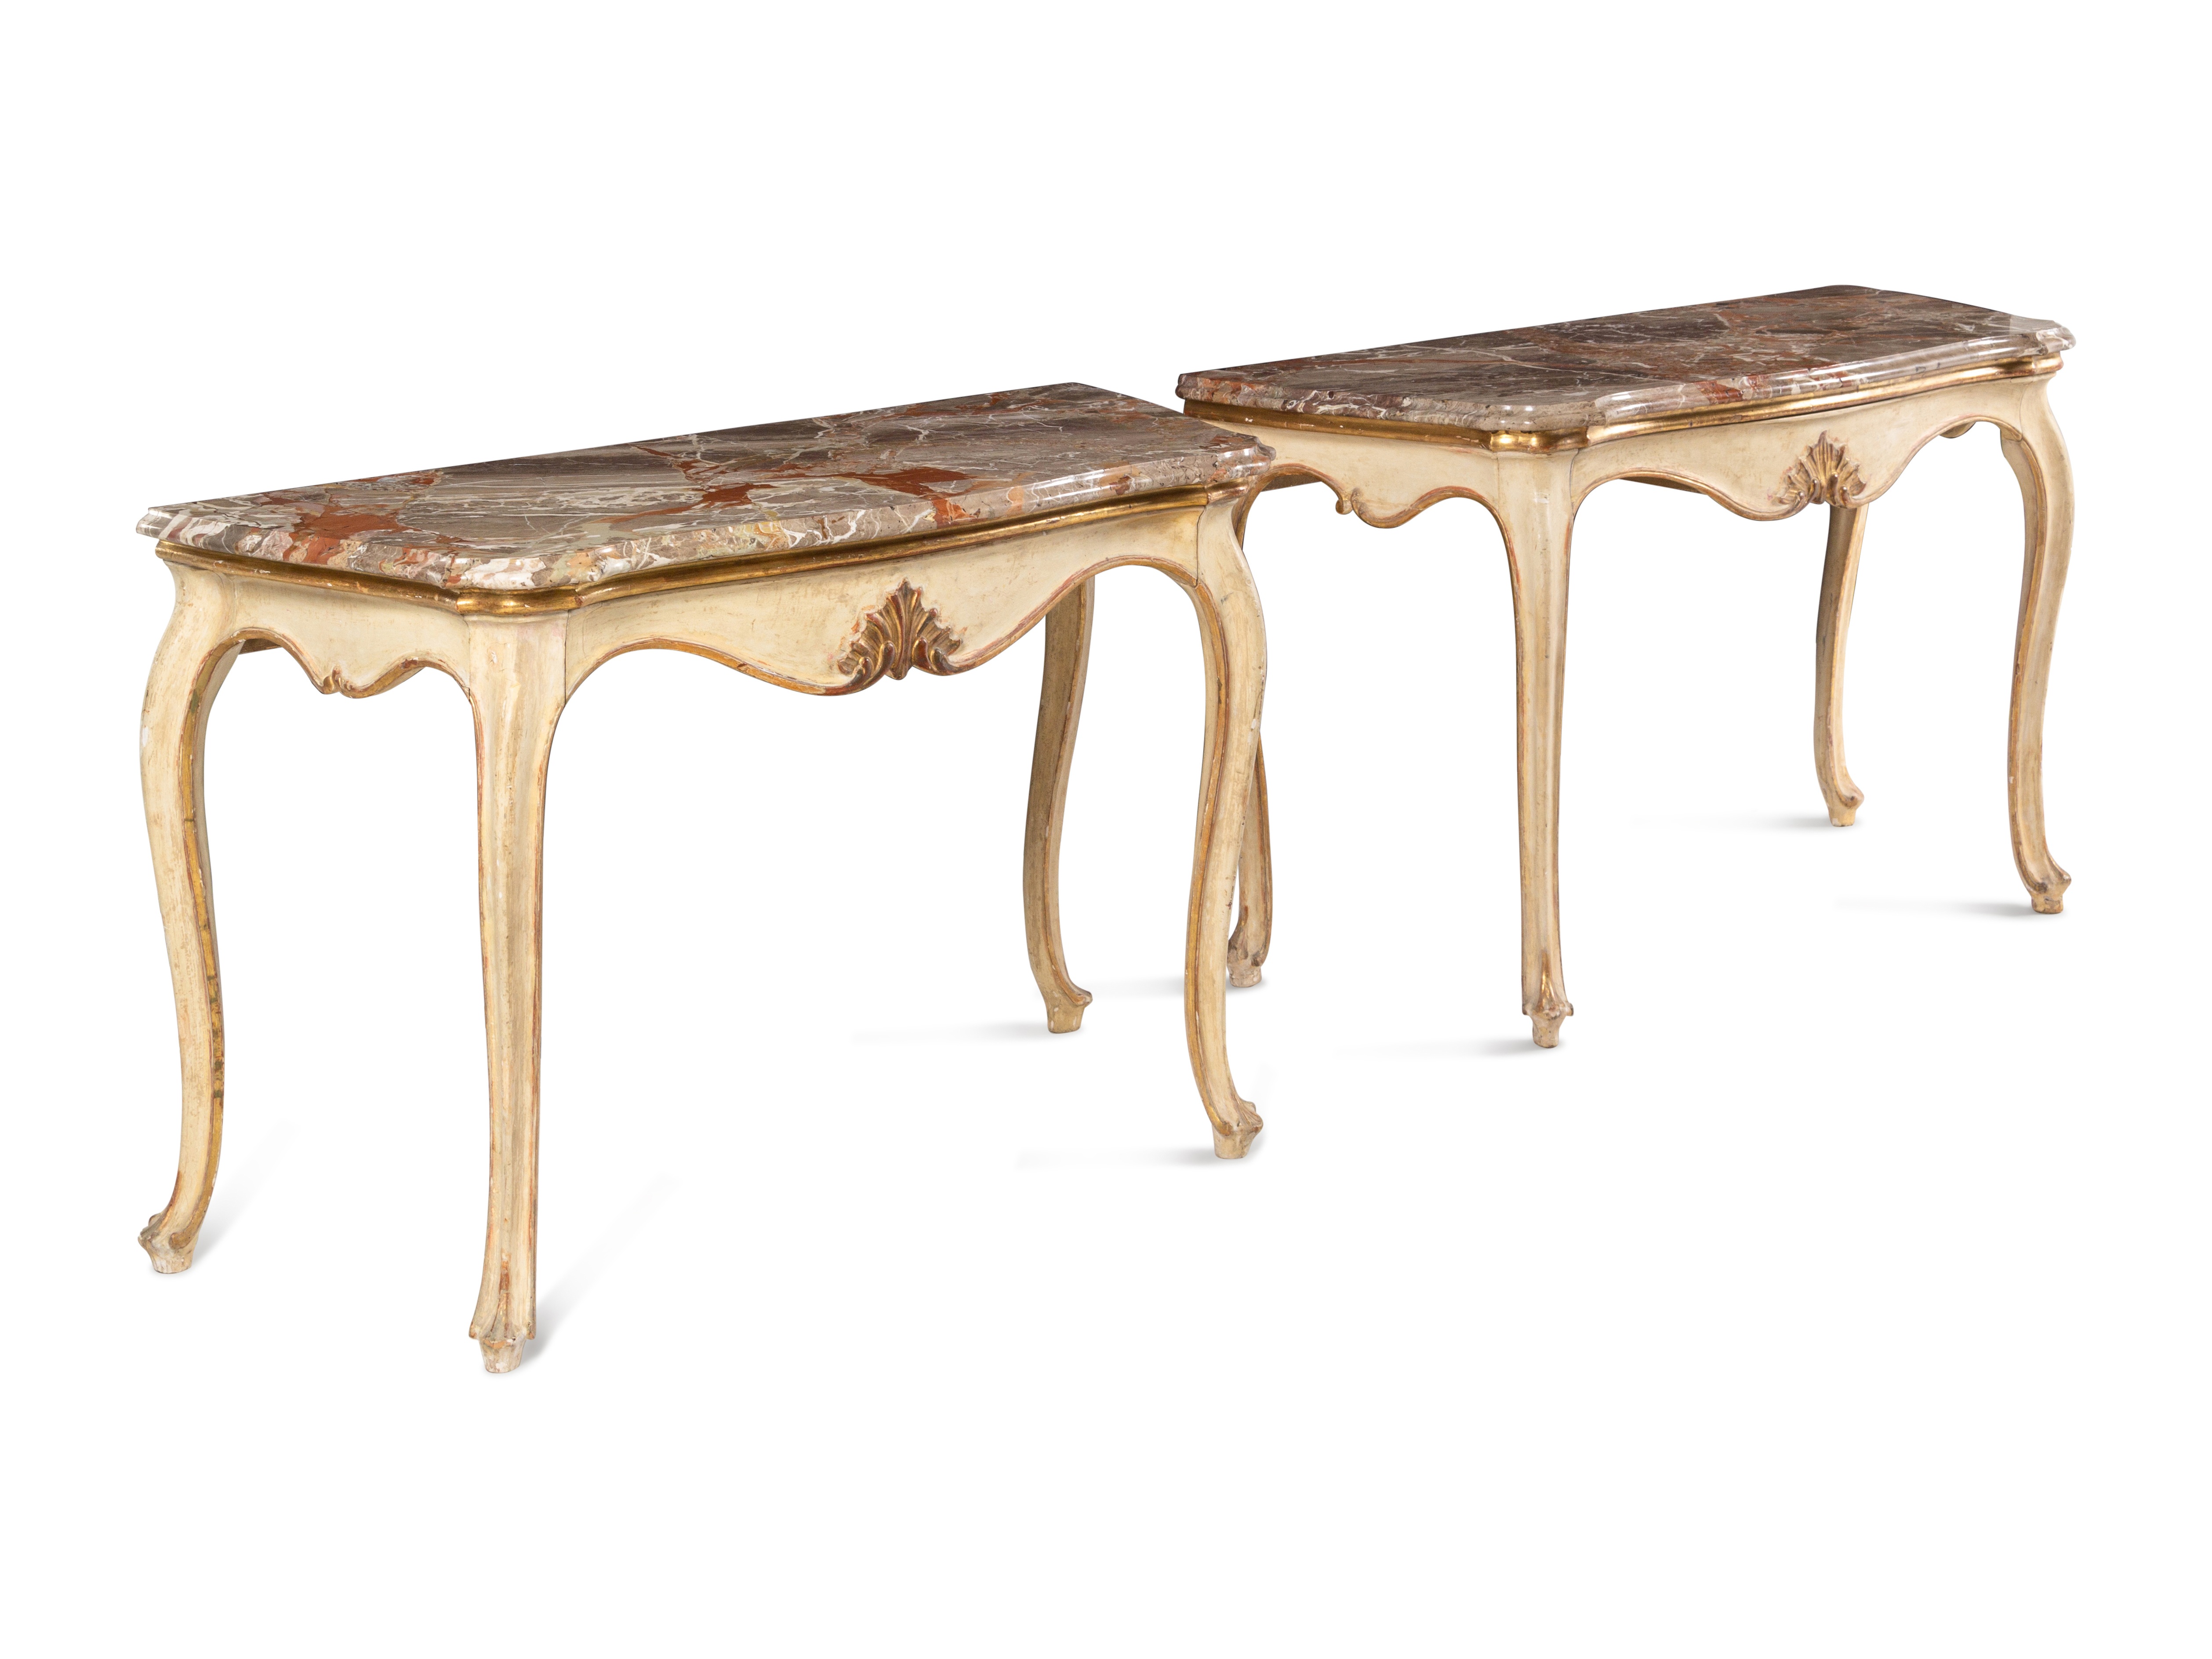 A Pair of Italian Painted and Parcel-Gilt Marble-Top Console Tables - Image 2 of 6